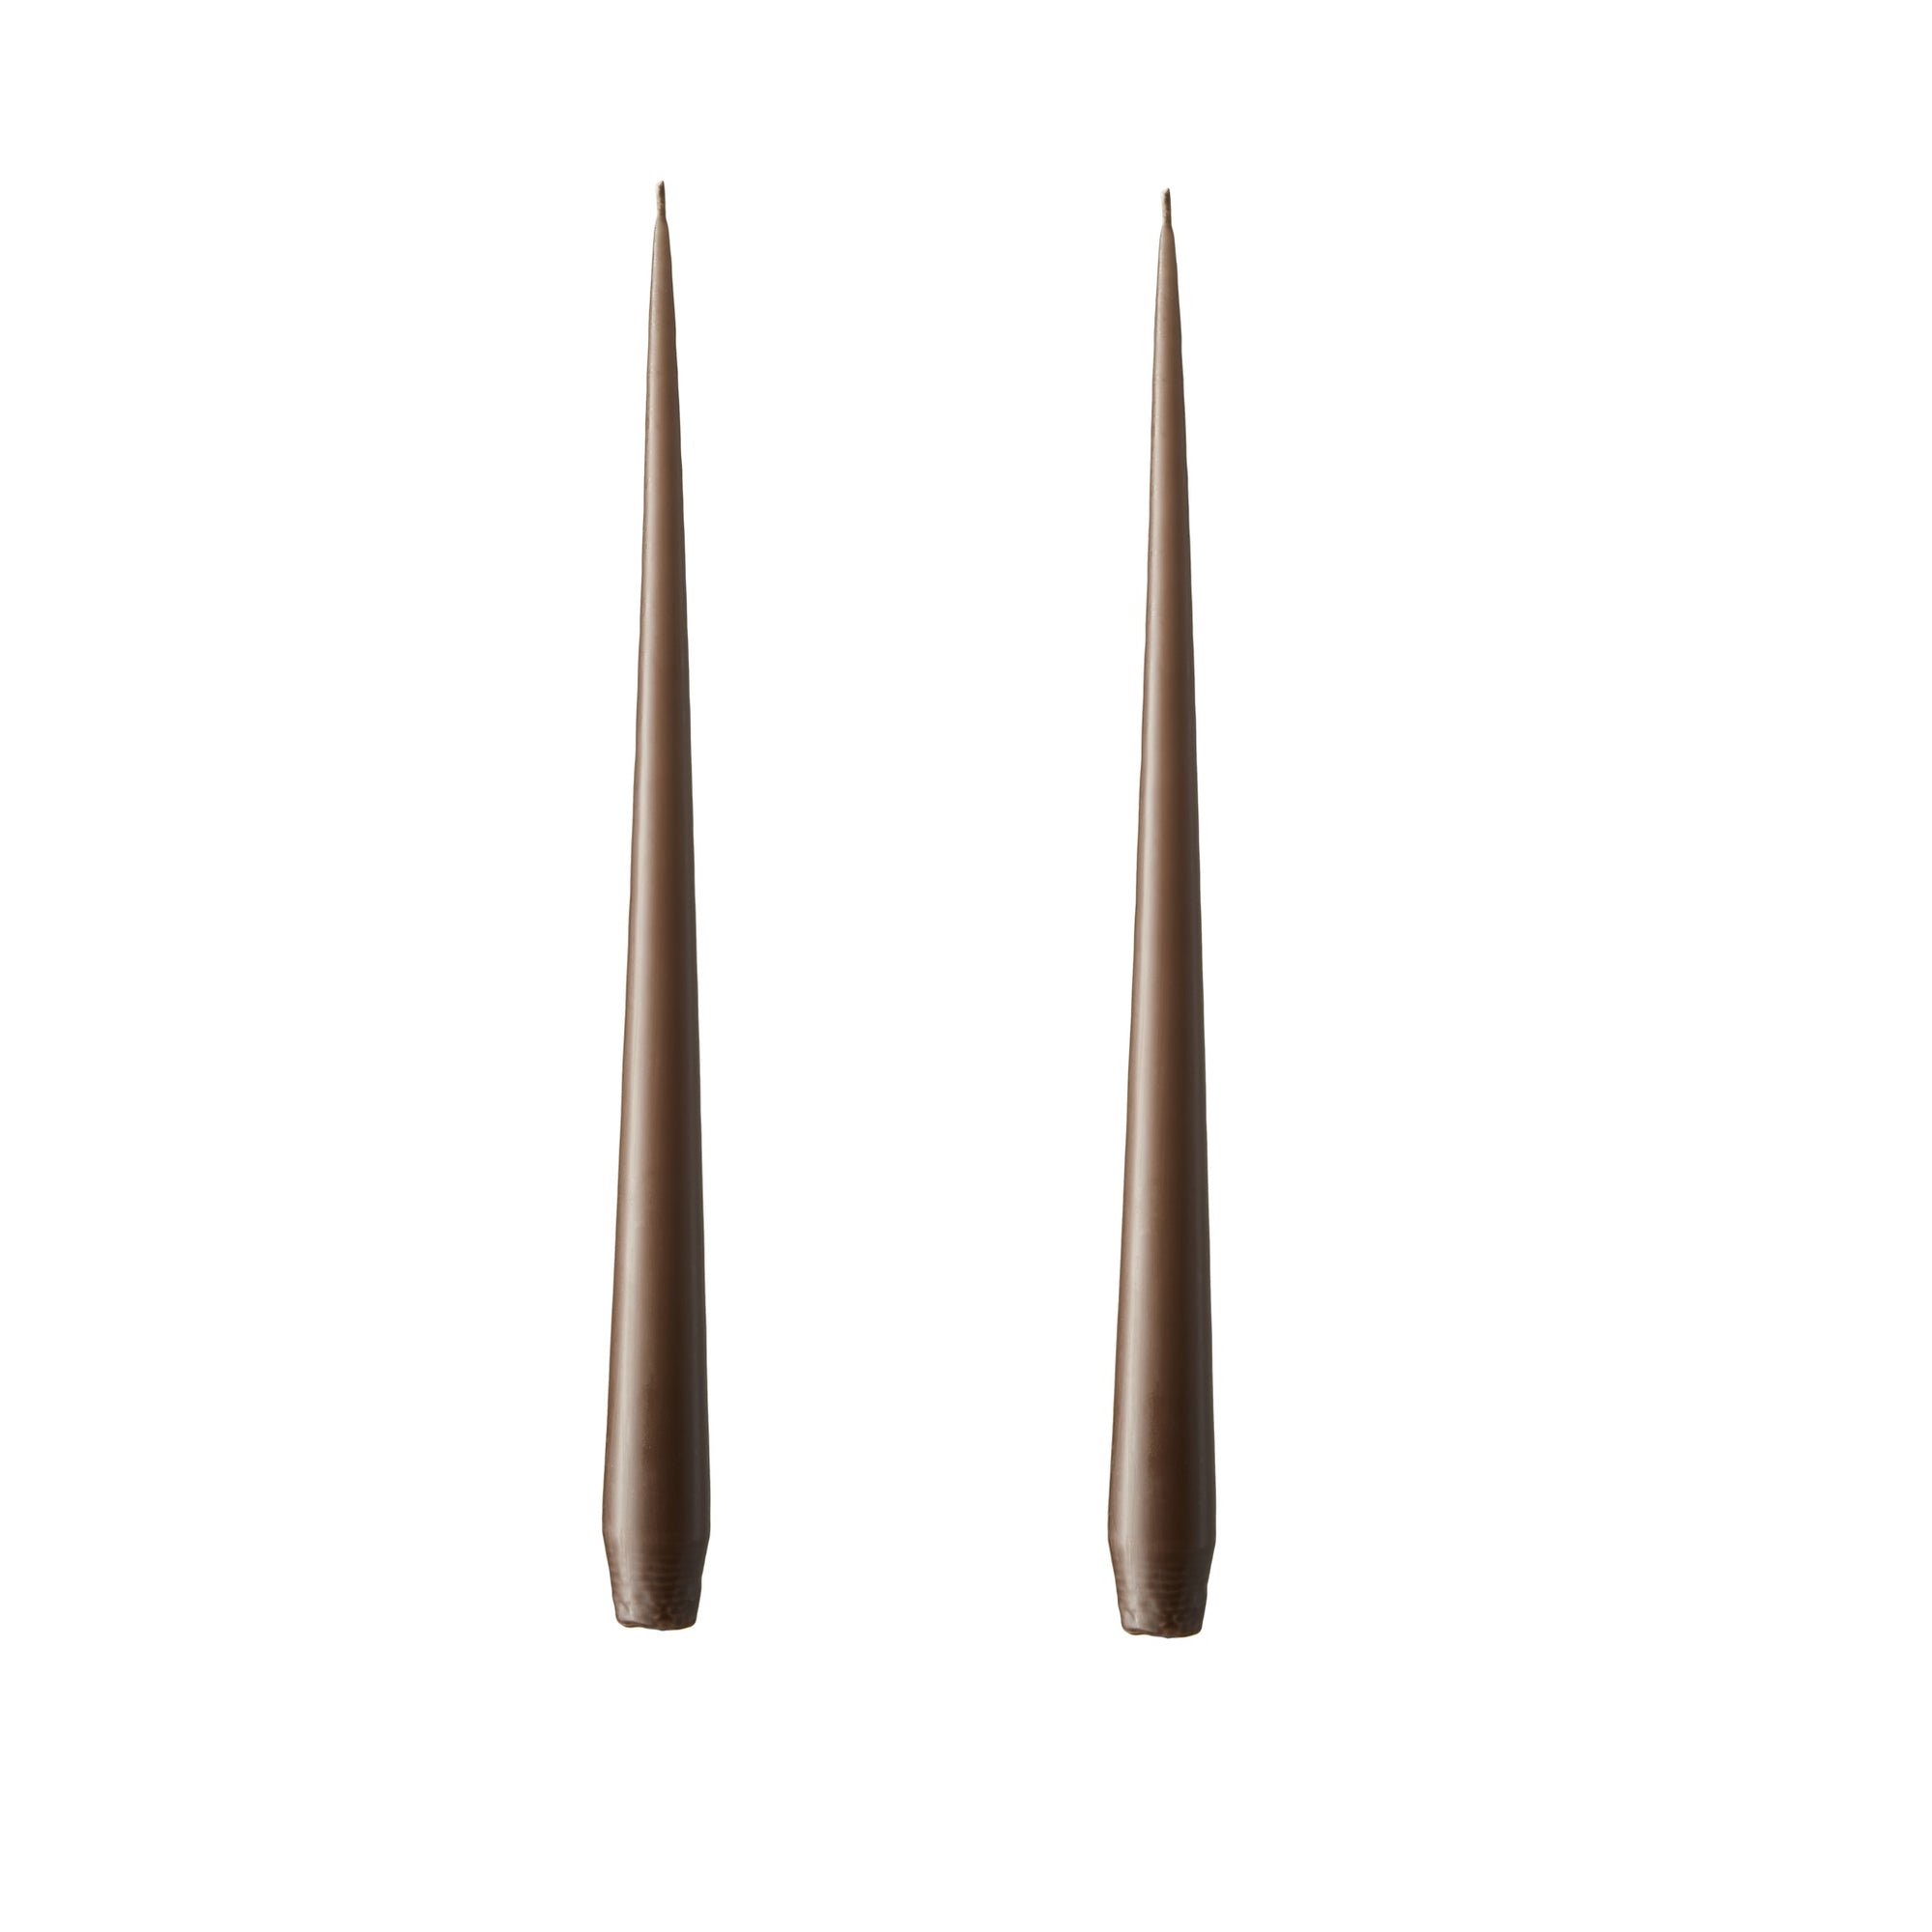 Brown Tapered Candles